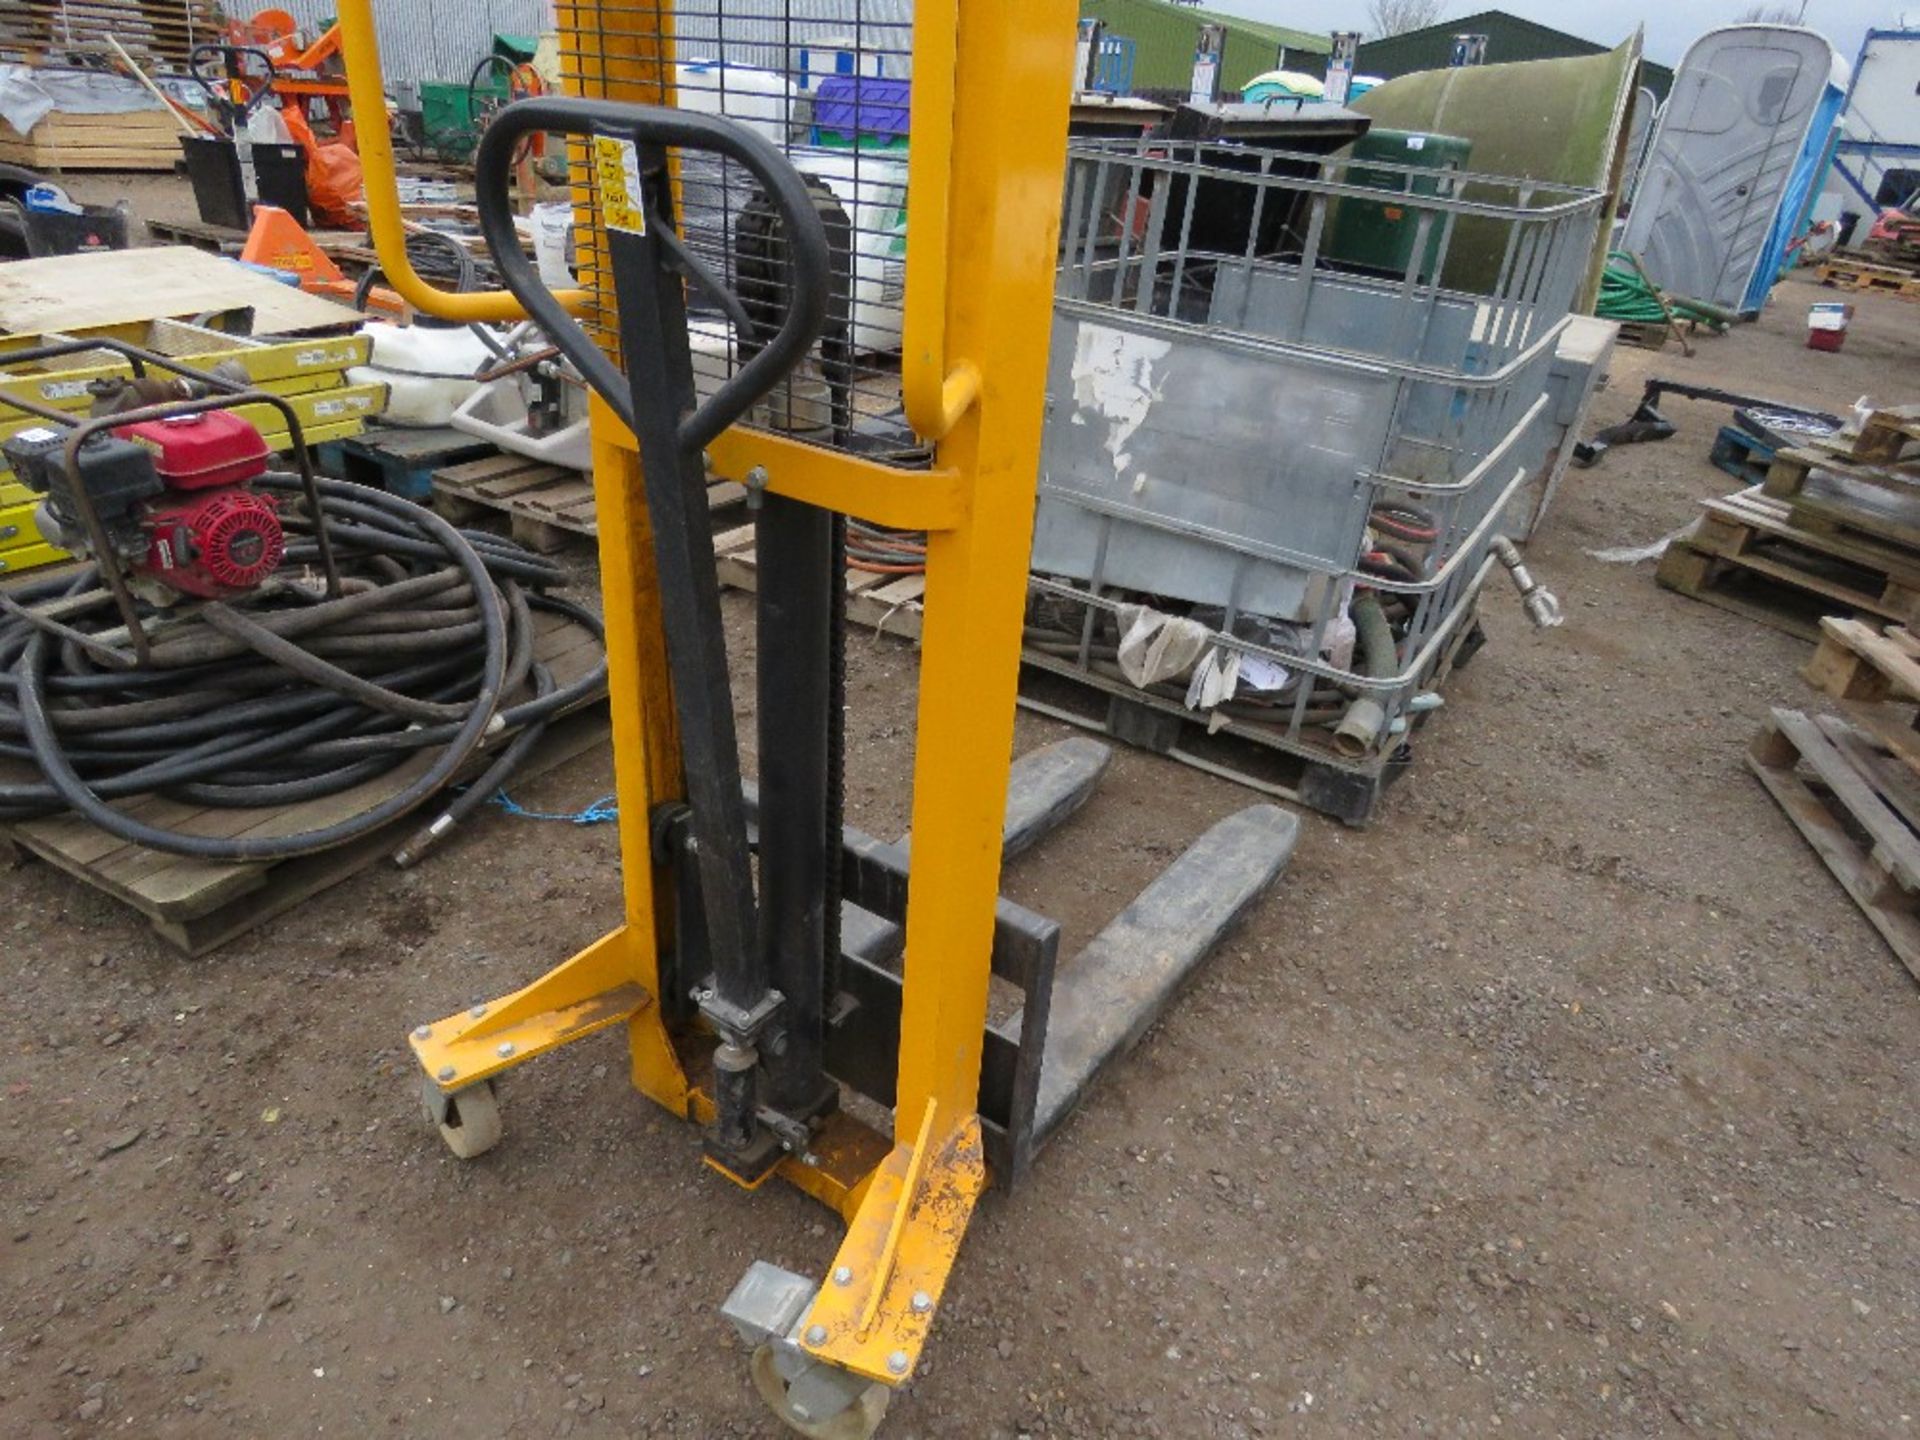 HAND STACKER MANUAL OPERTAED FORKLIFT TRUCK, 1 TONNE MAXIMUM CAPACITY. SOURCED FROM COMPANY LIQUIDA - Image 3 of 6